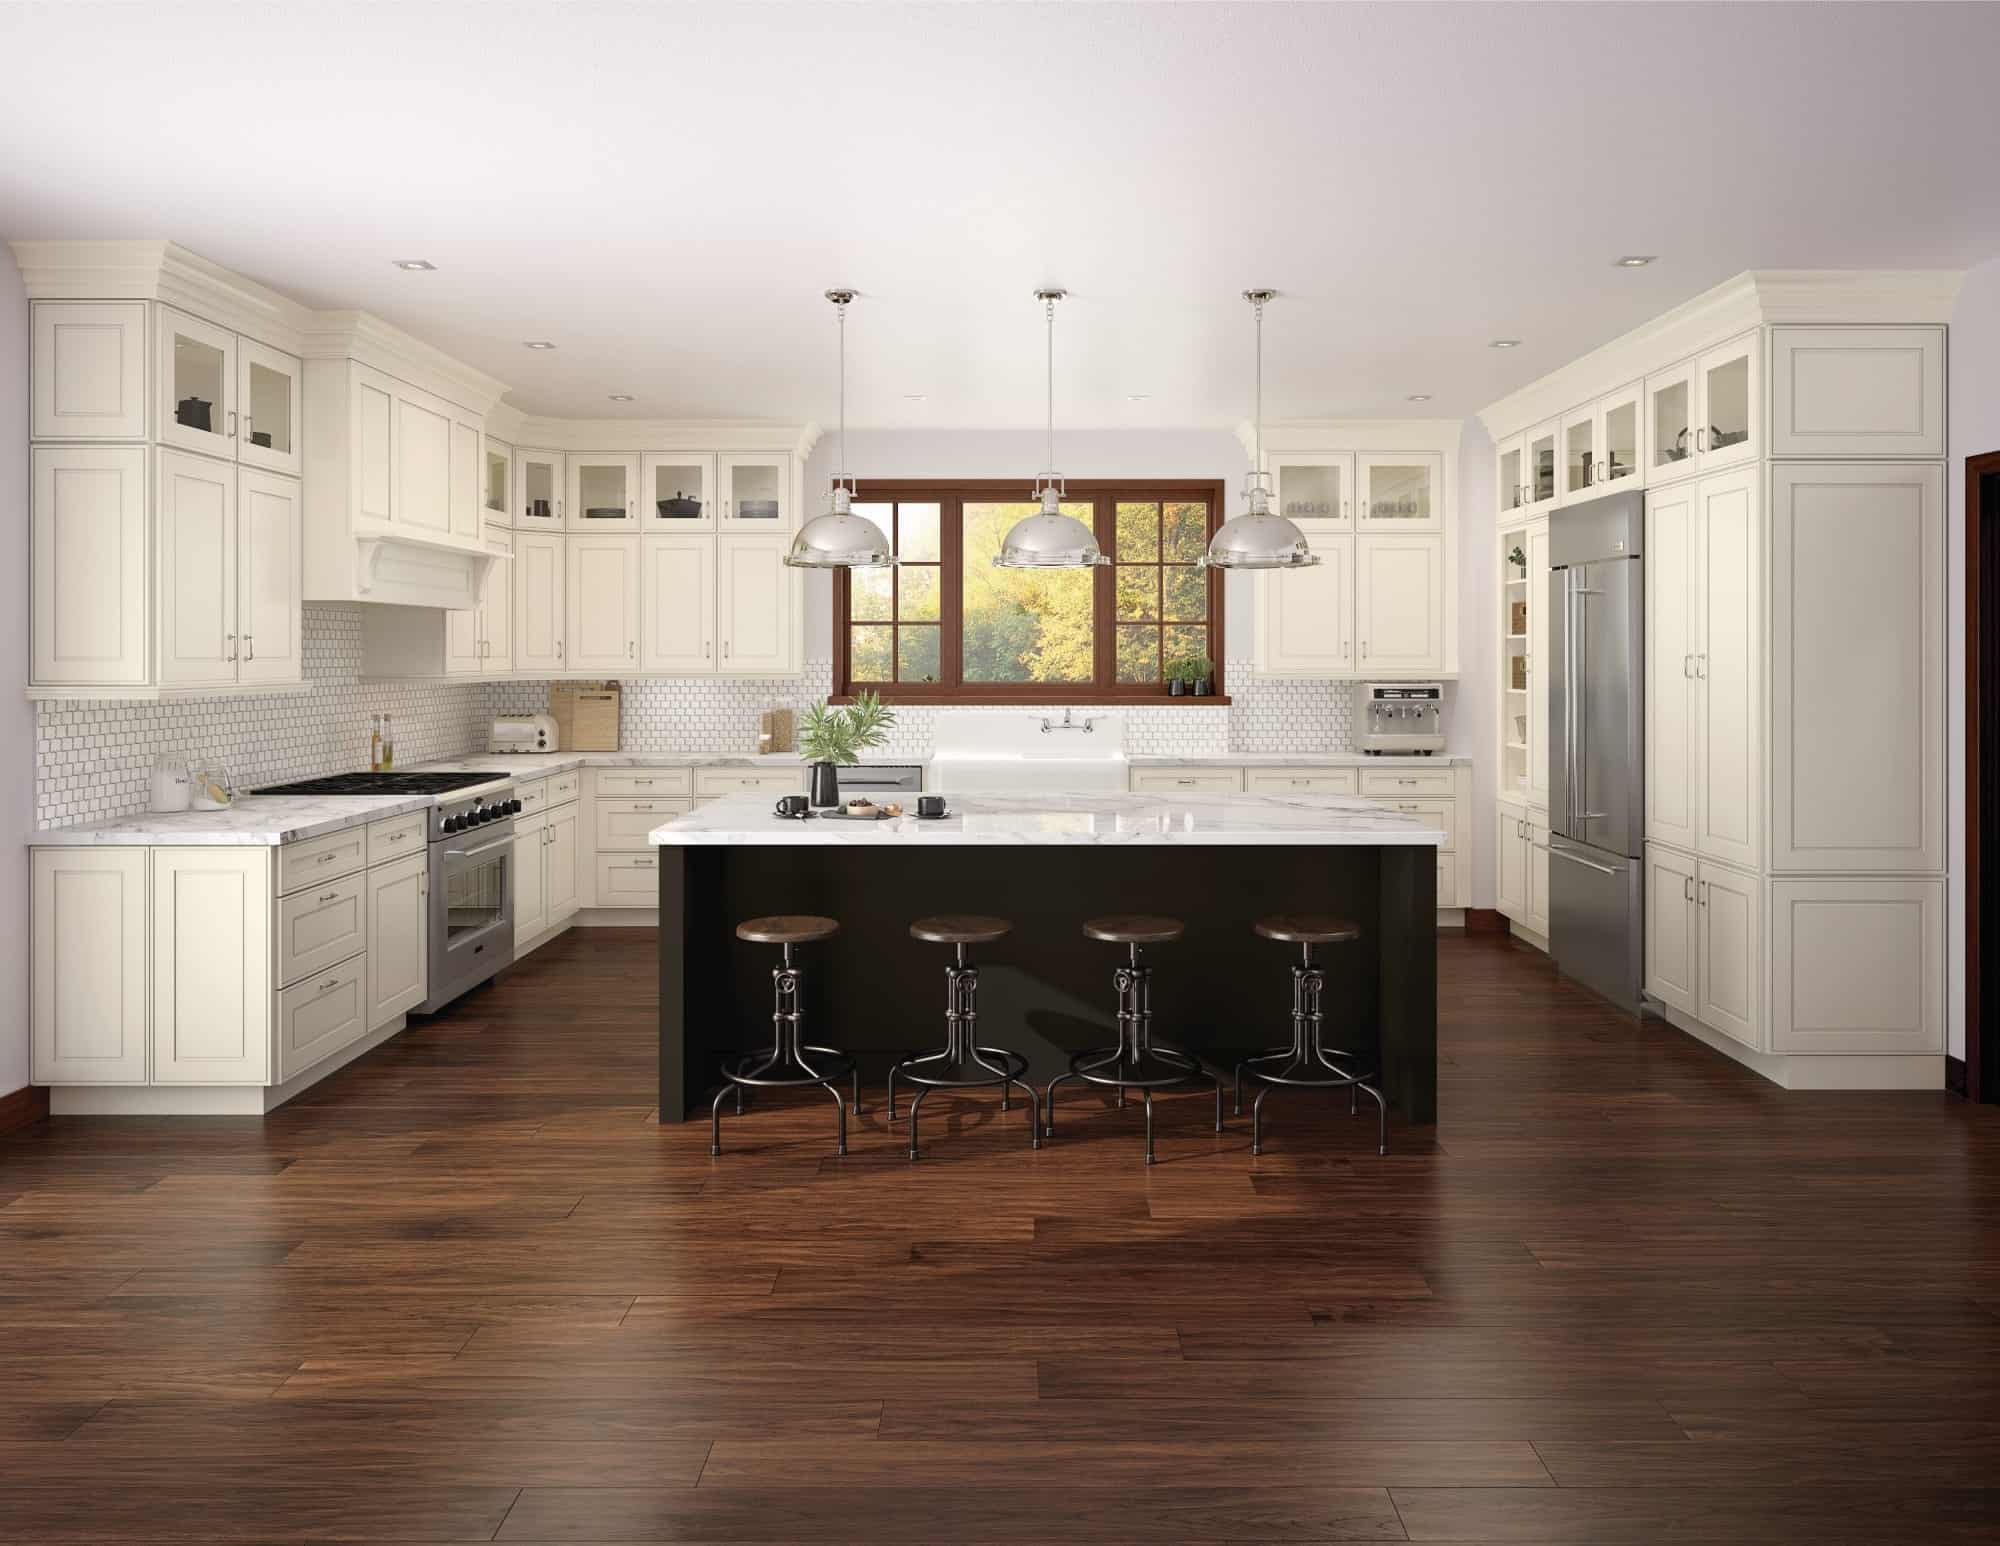 Houston Cabinets | Cabinet Dealer & Contractor | BBB A+ Rating